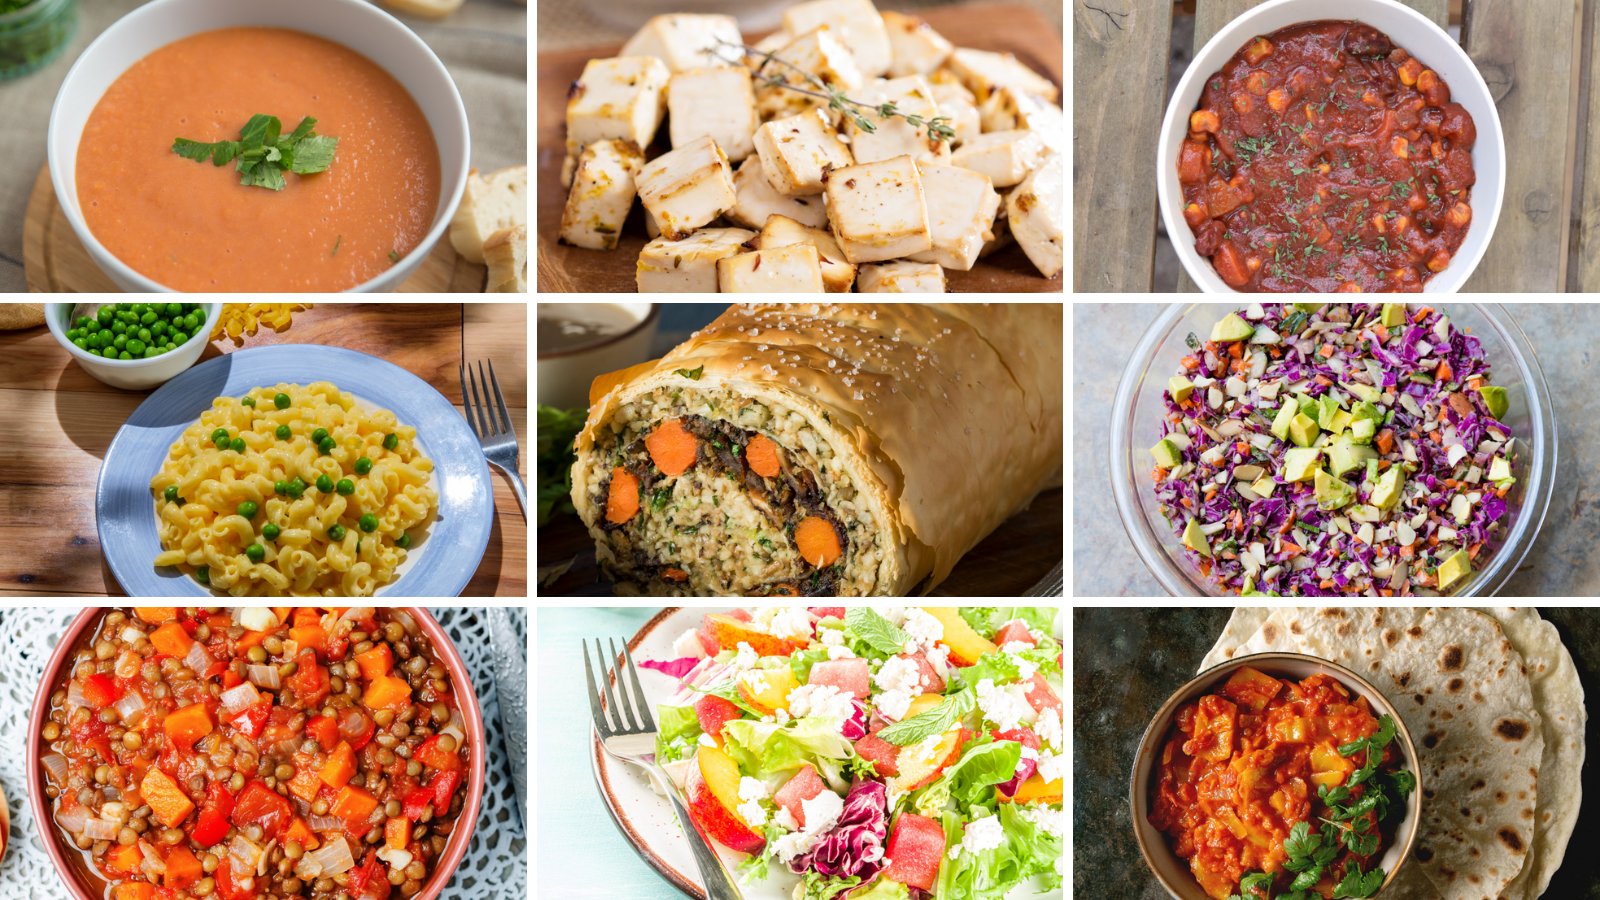 10 Amazing Vegan Dinners For Weight Loss